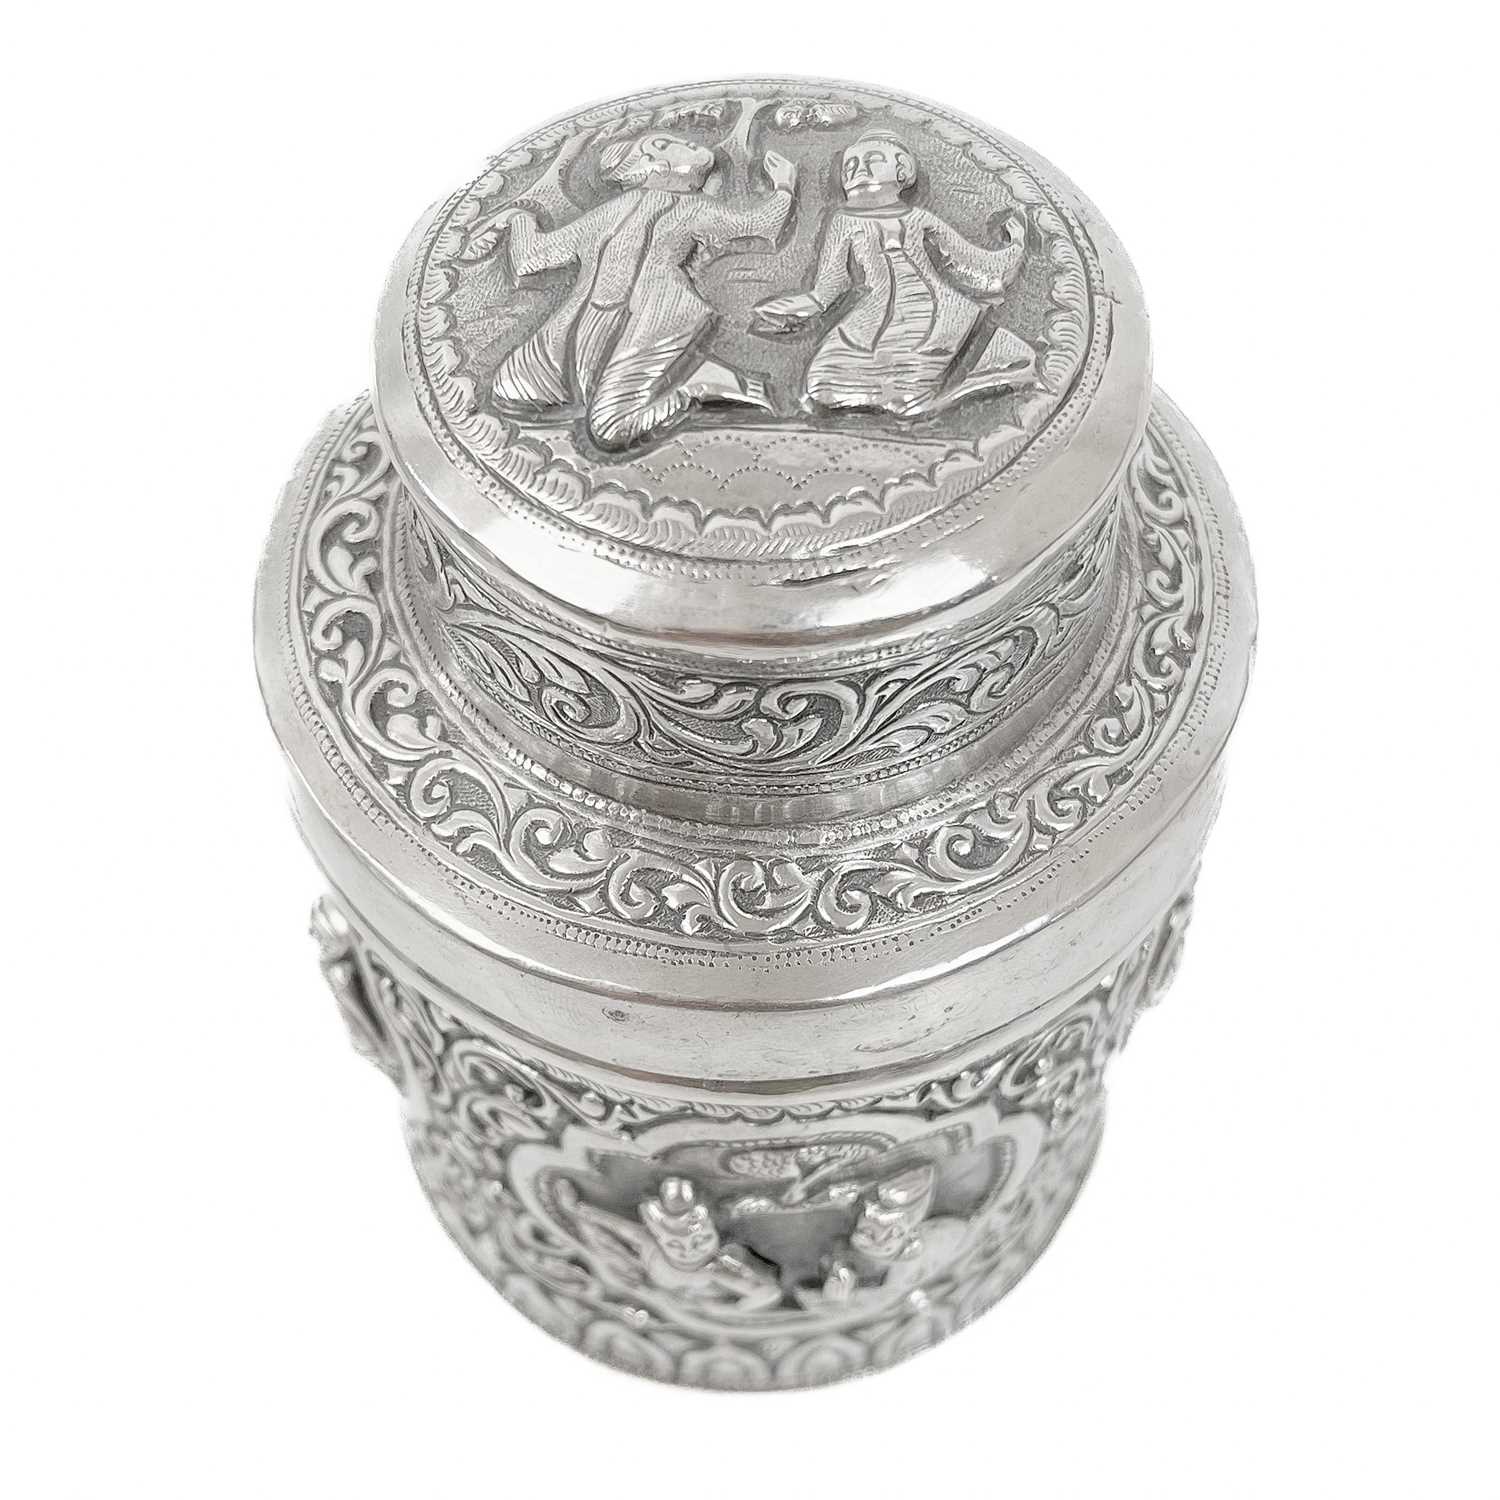 Two Burmese silver lidded cannisters, mid 20th century - Image 14 of 25